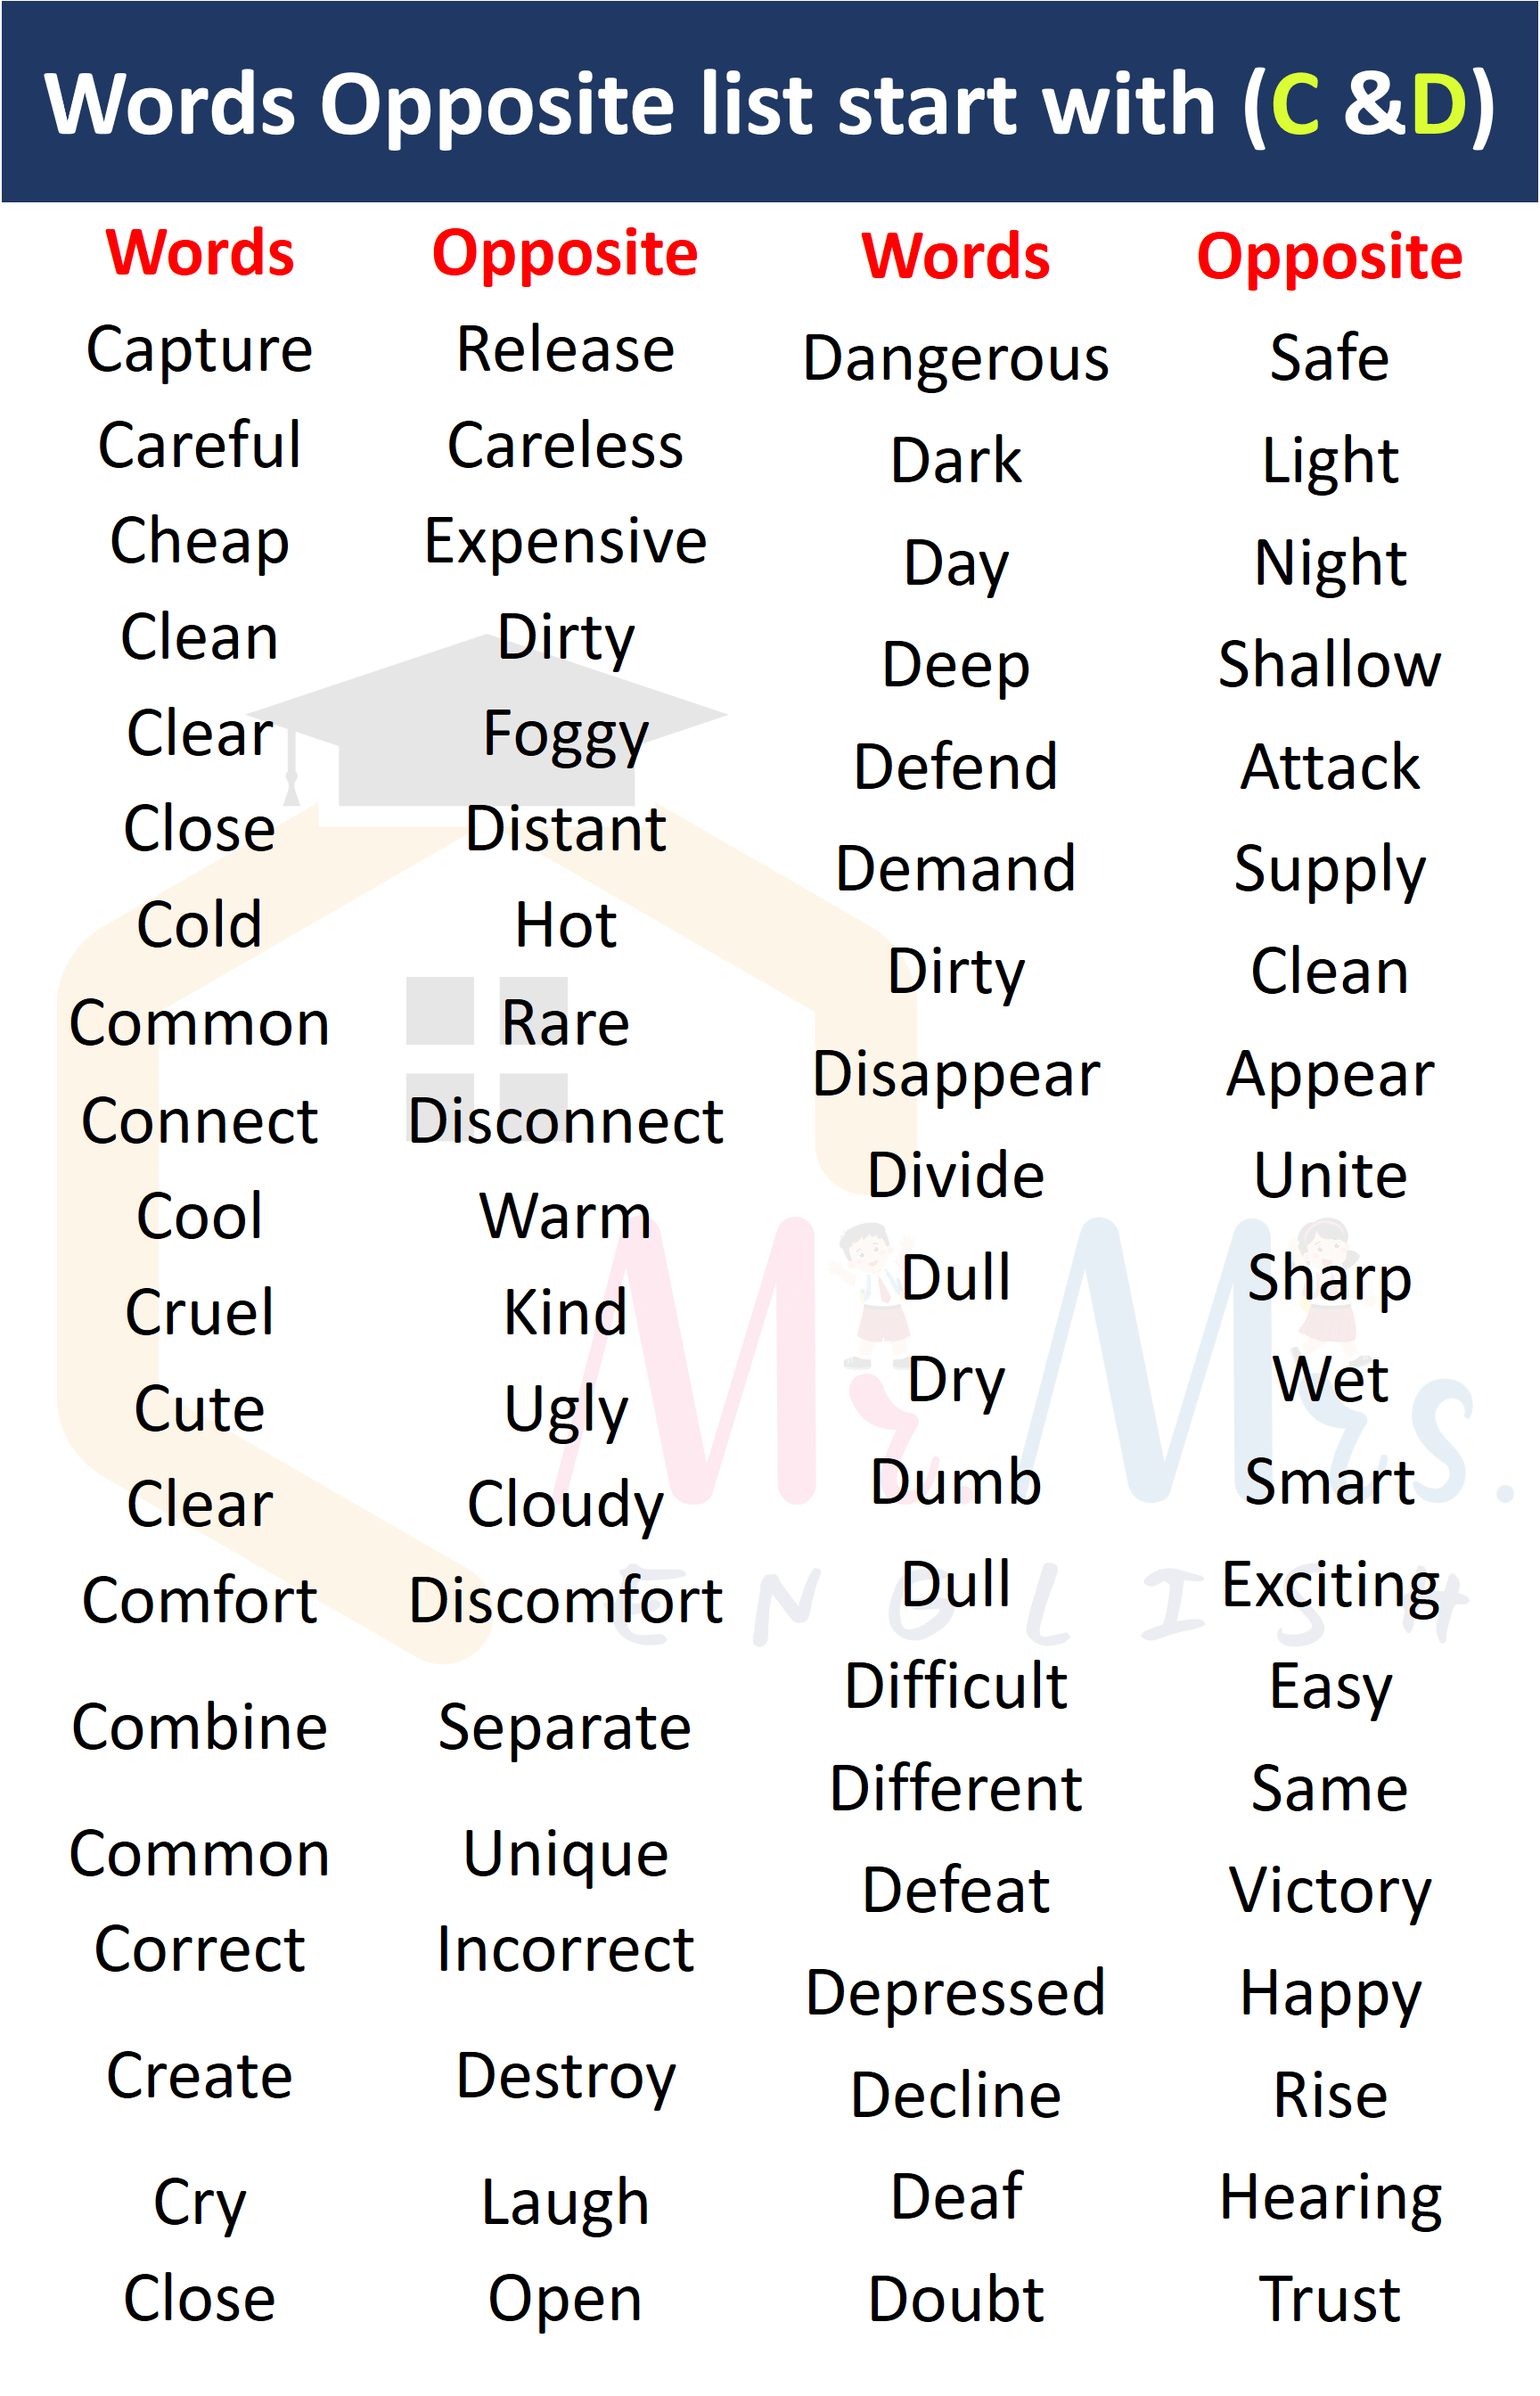 Words Opposite List From A to Z | Words Opposite C&D